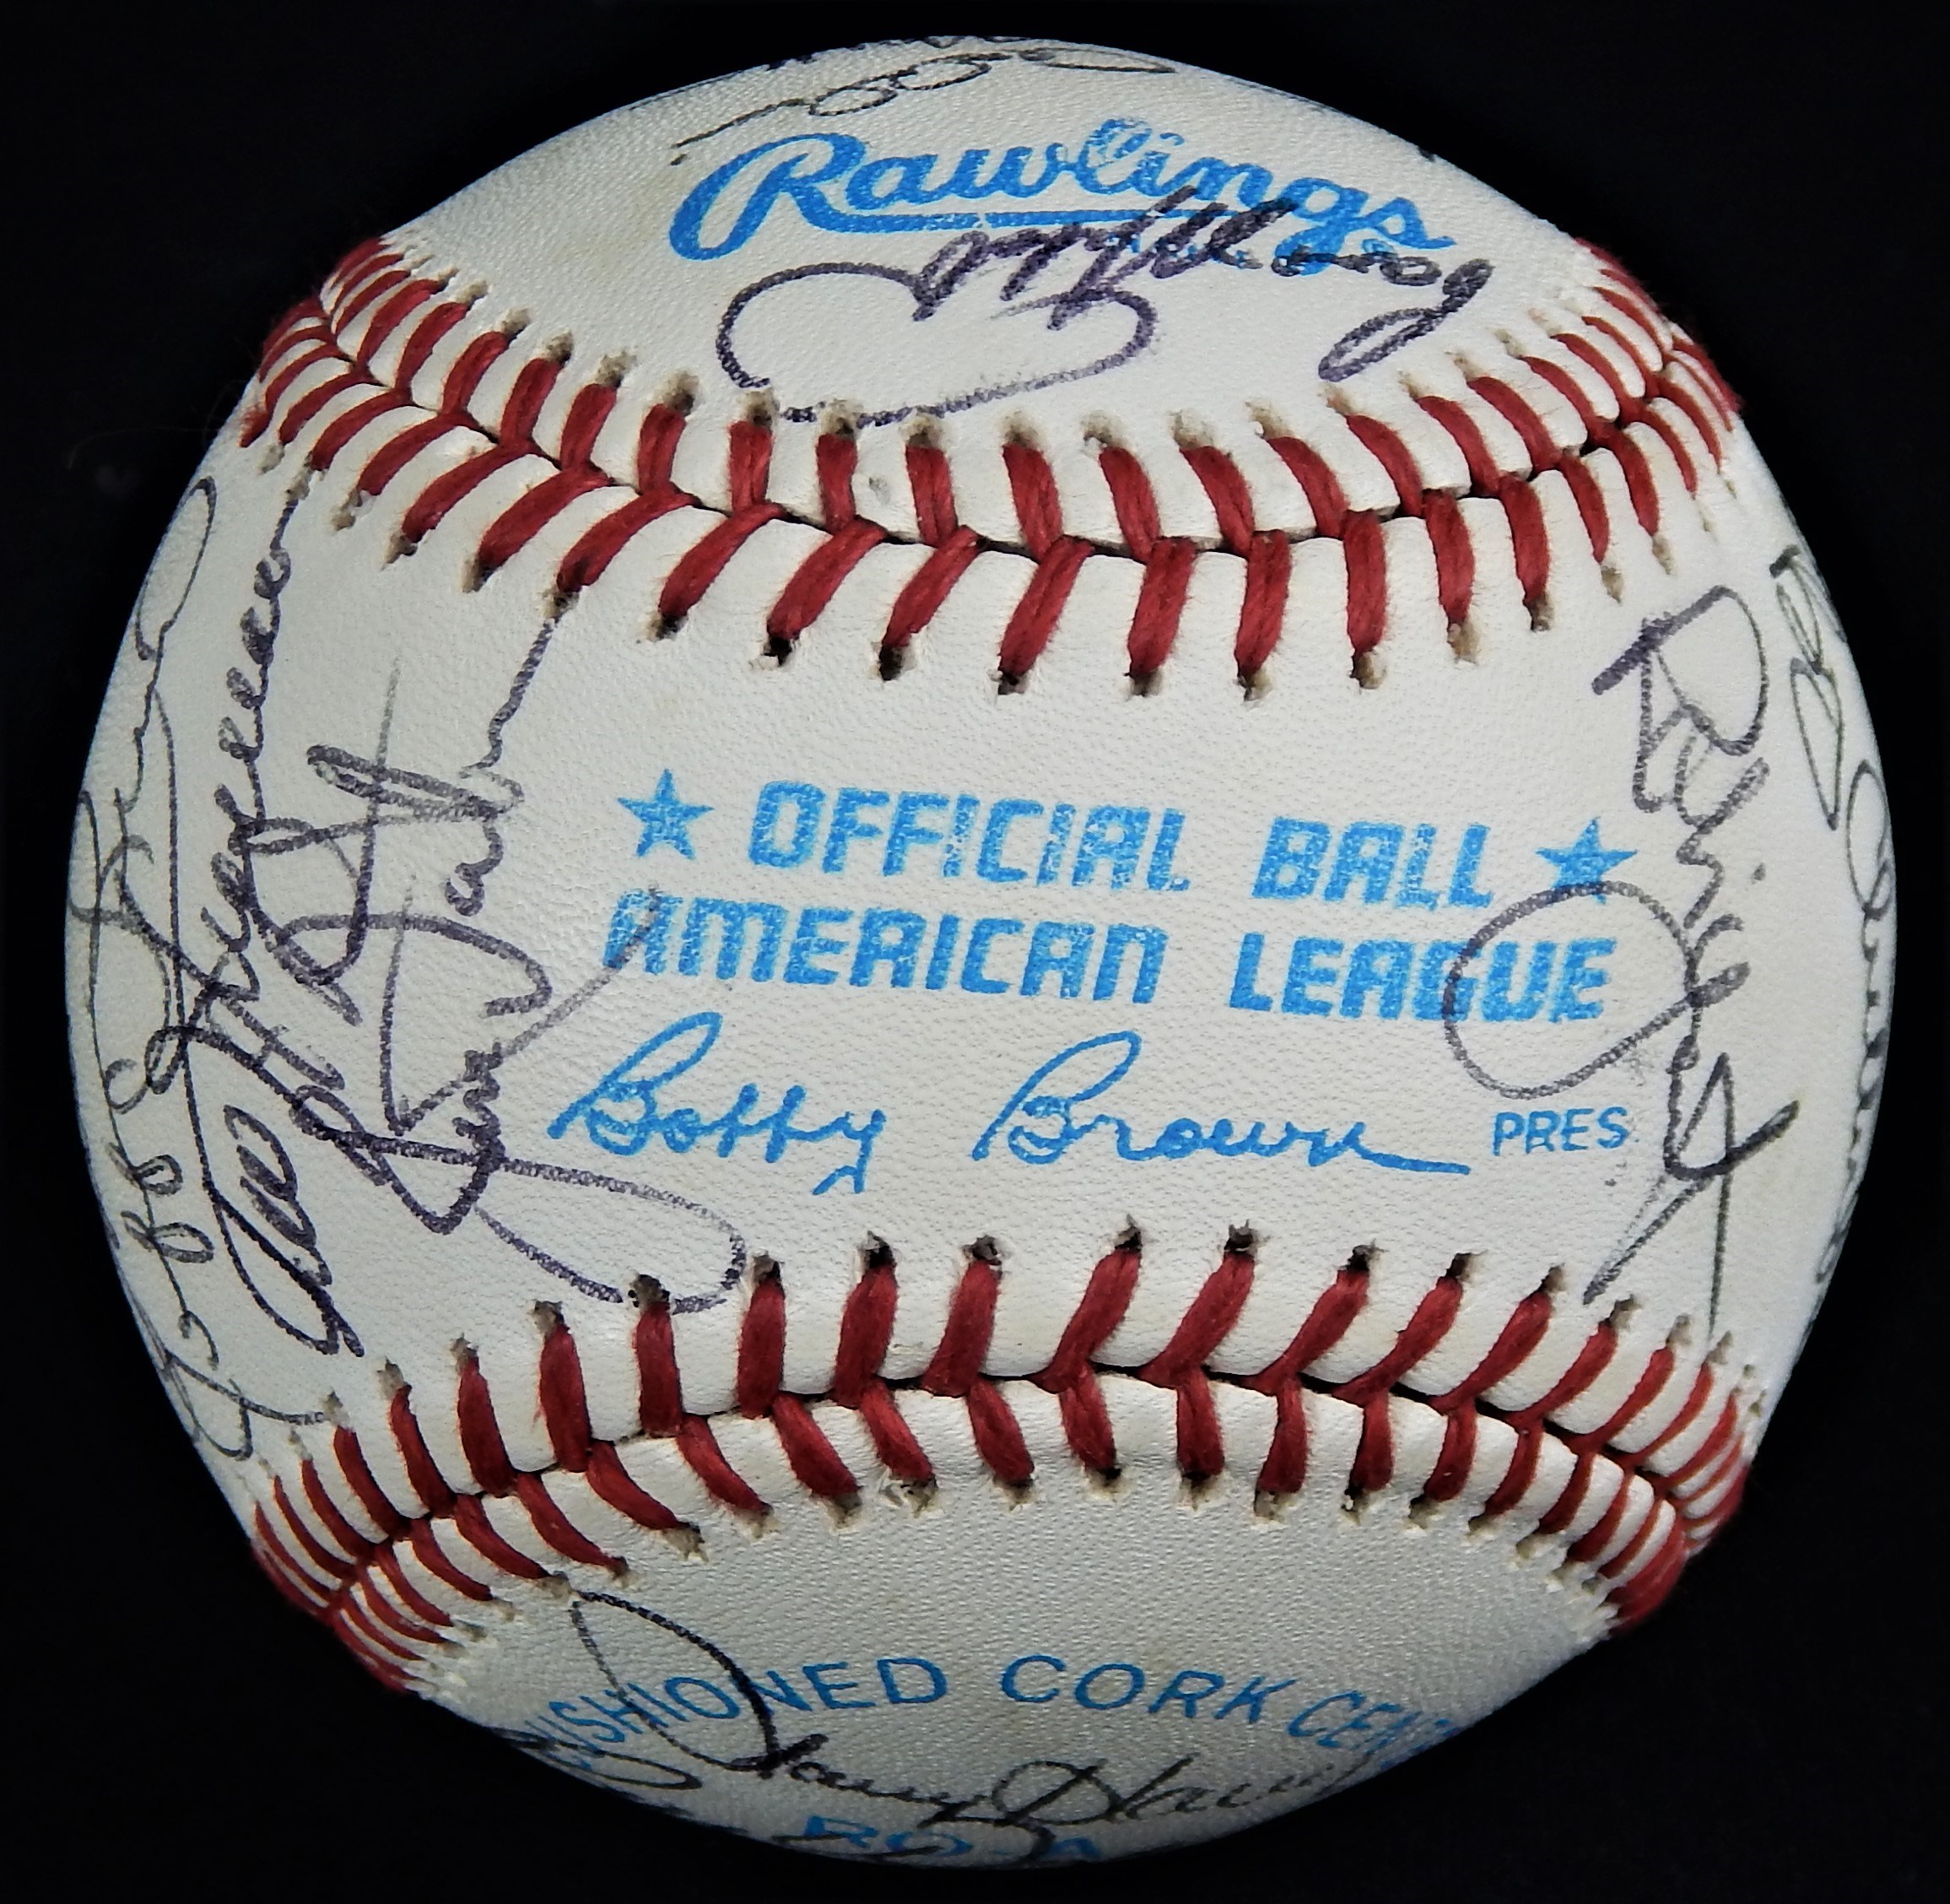 Baseball Autographs - 1988 Milwaukee Brewers Team Signed Baseball with Hall of Famers